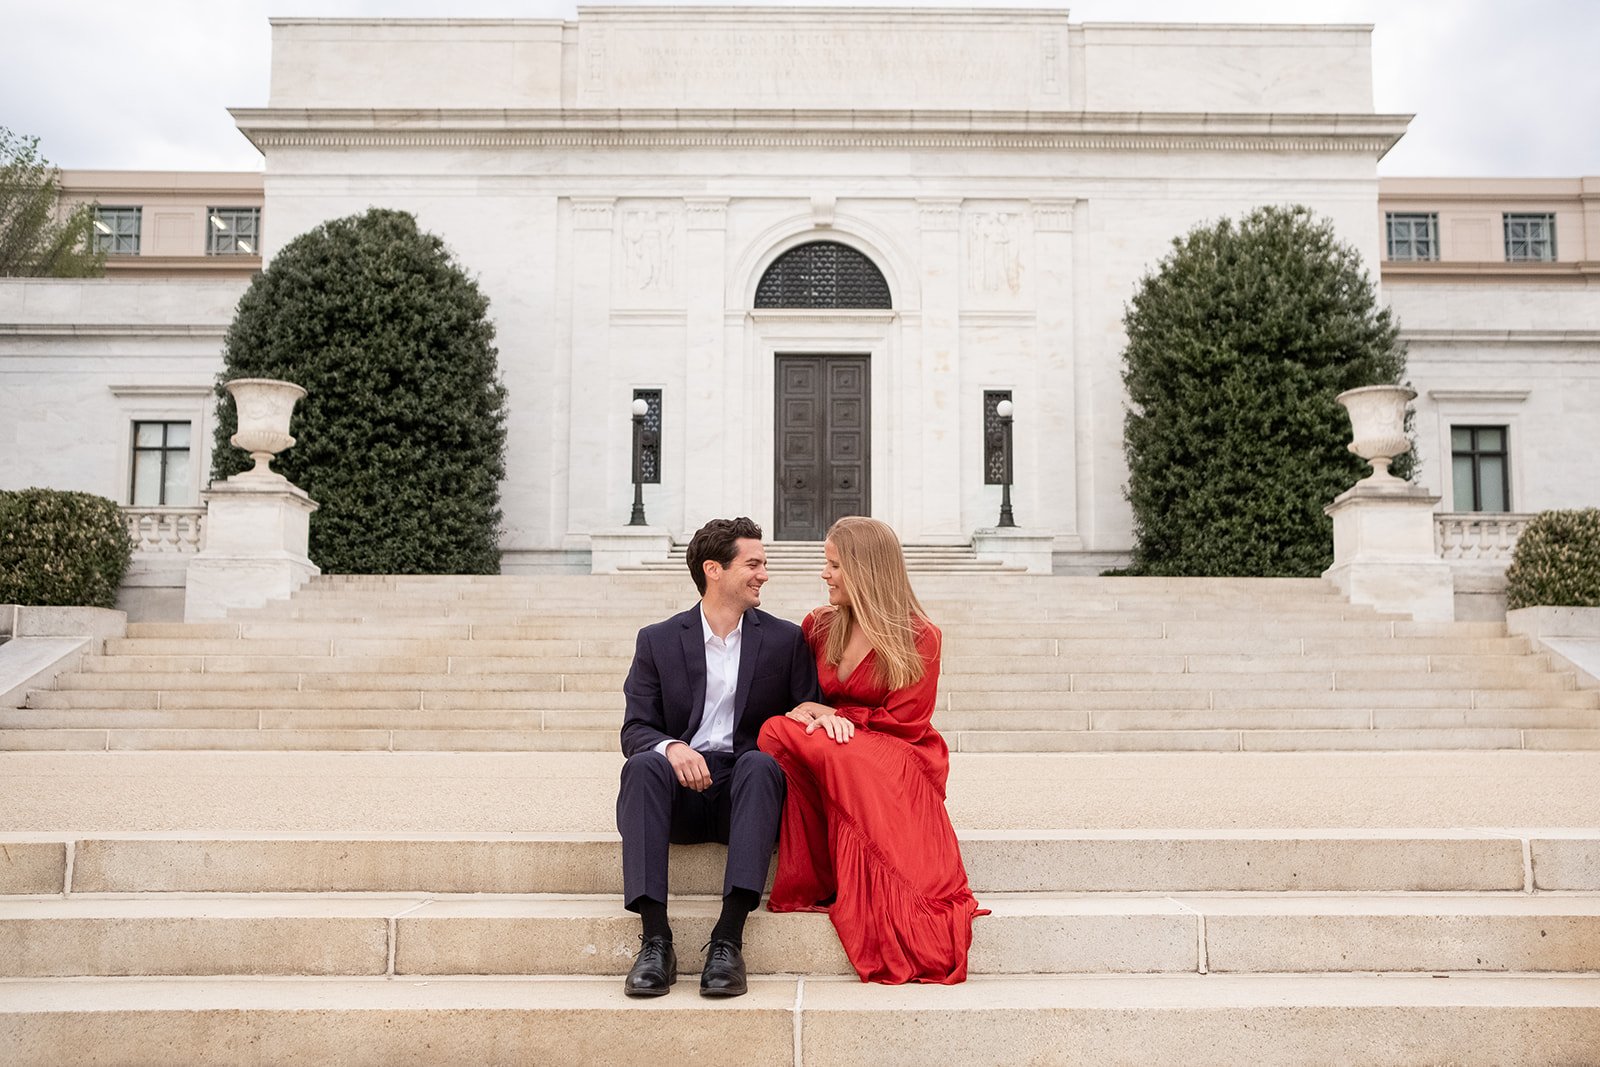 A couple sits on the steps of the American Institute of Pharmacy Building in Washington, DC.